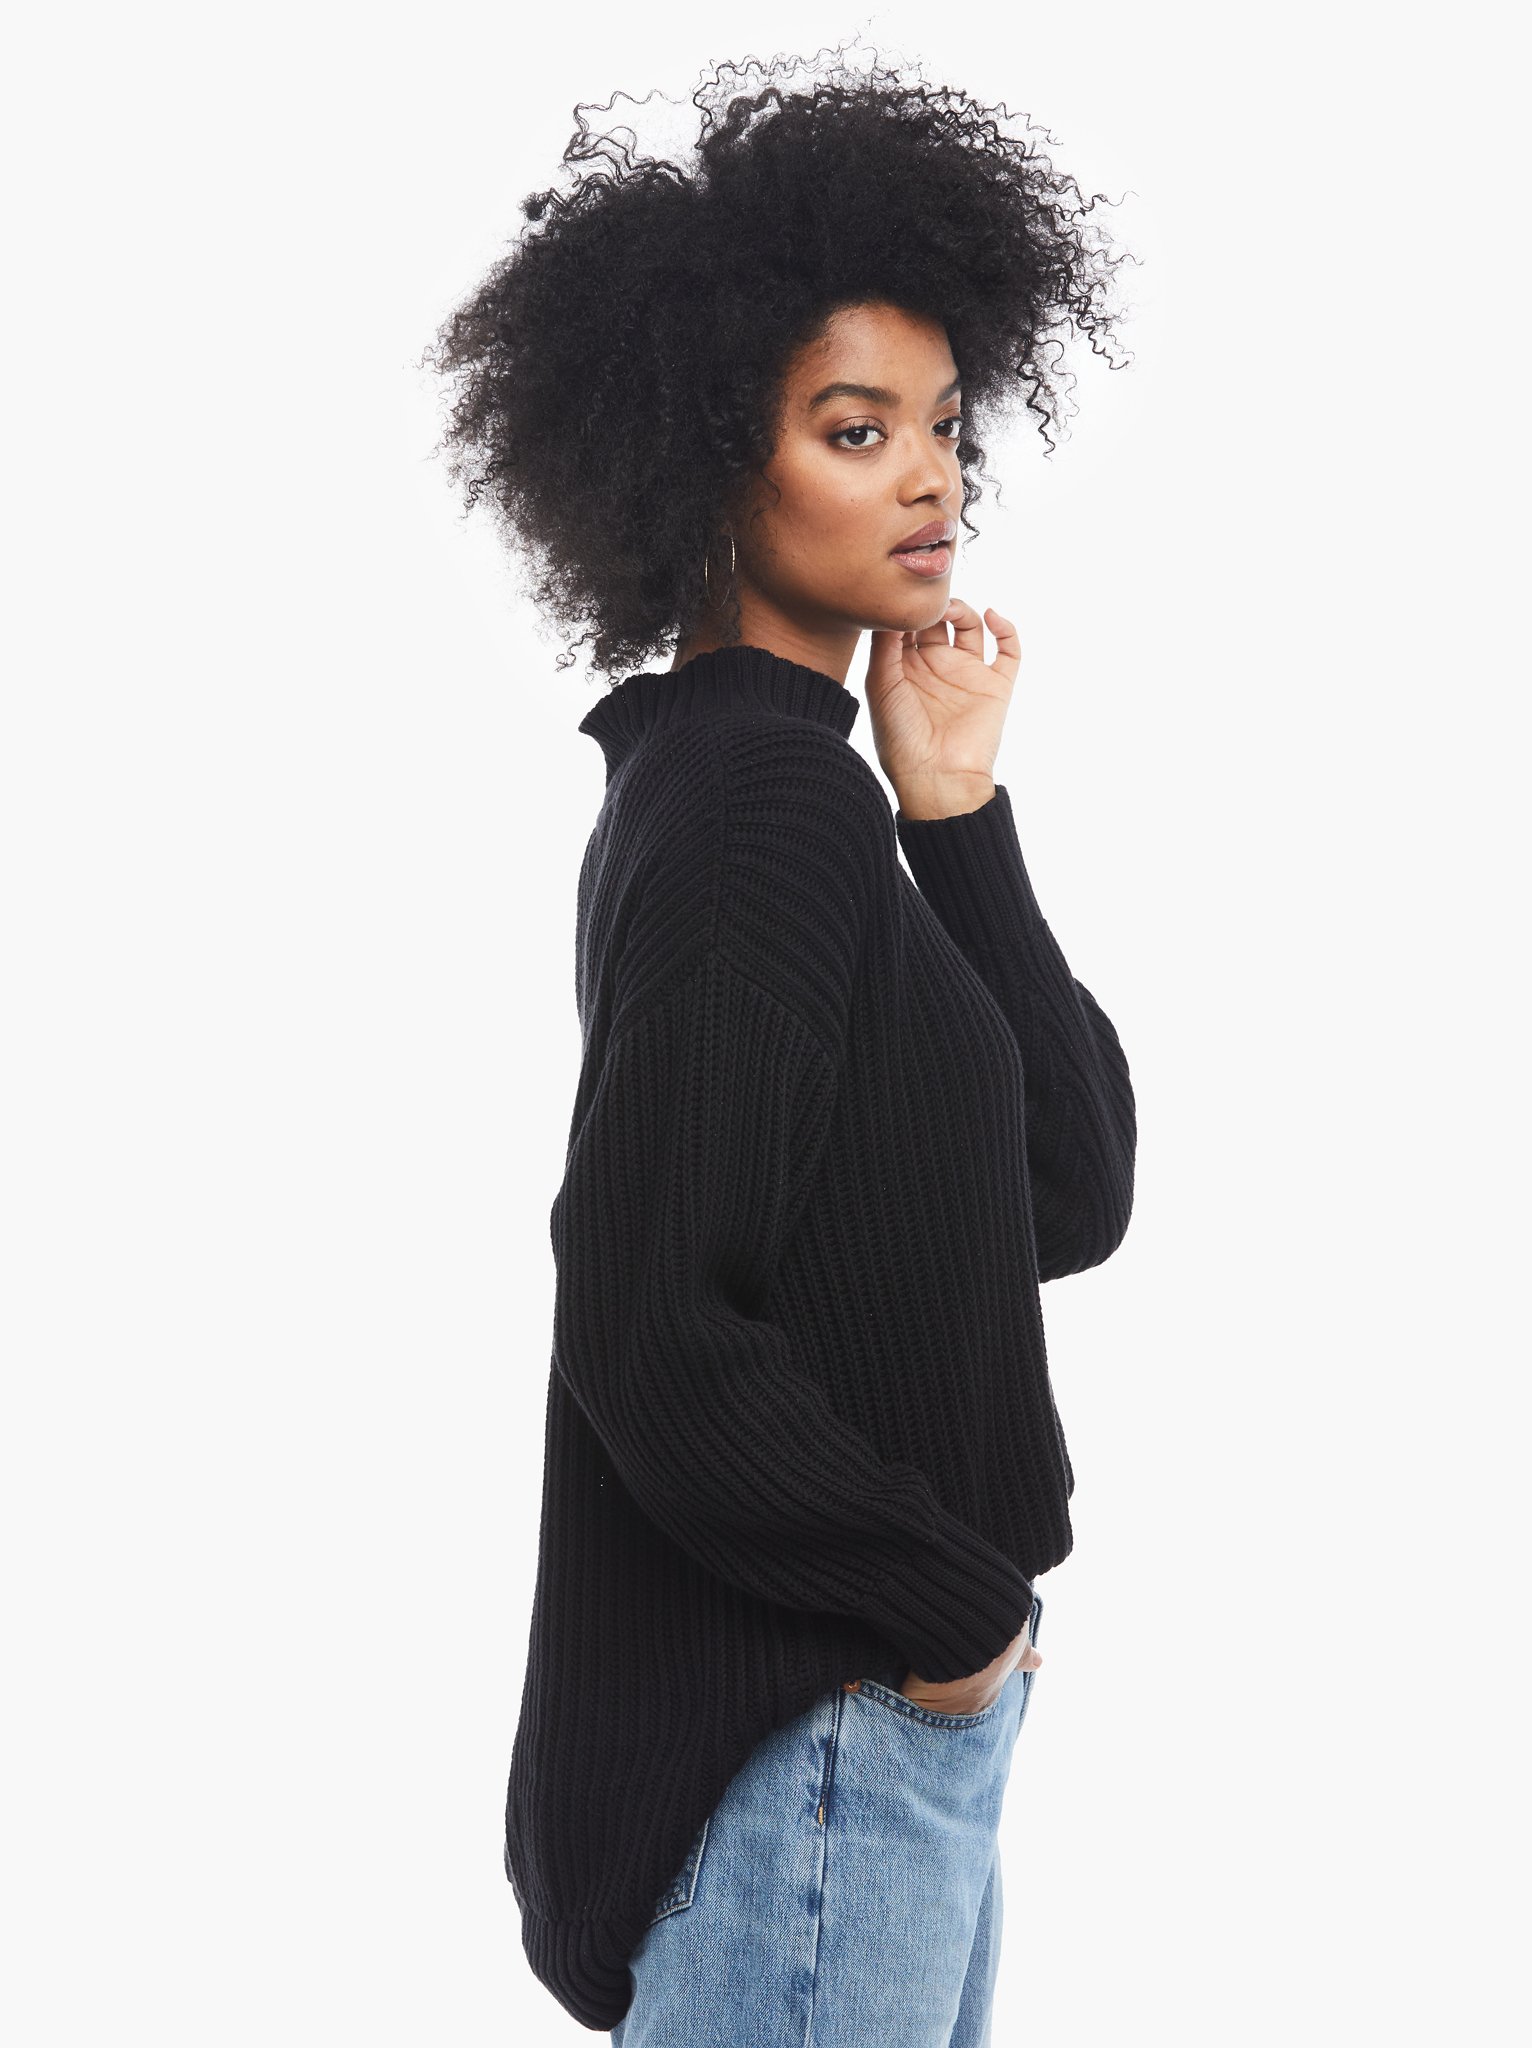 ethical cotton knitwear brands